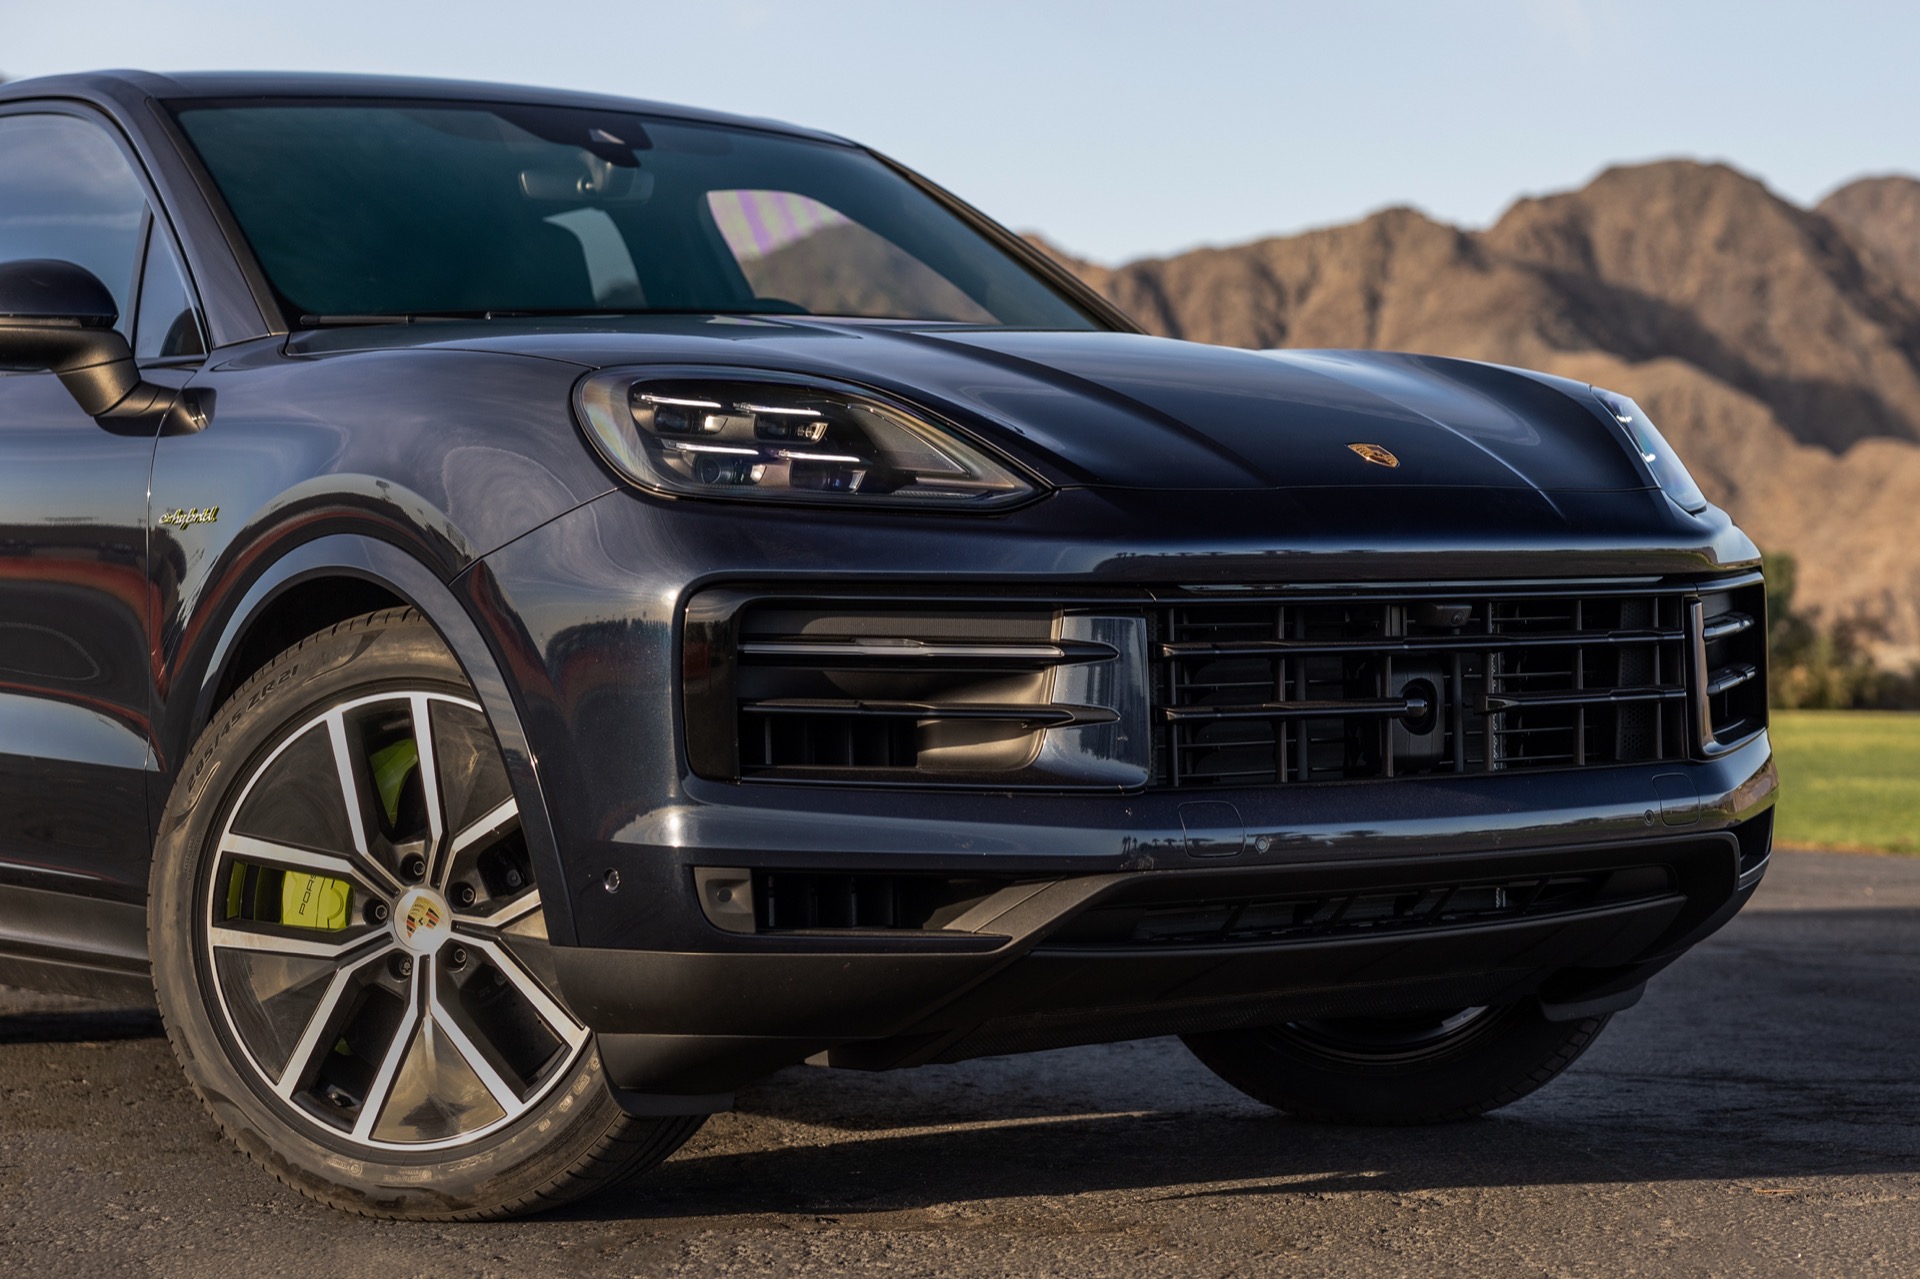 Electrified Porsche Cayenne with over 690 hp reportedly in the works Auto Recent